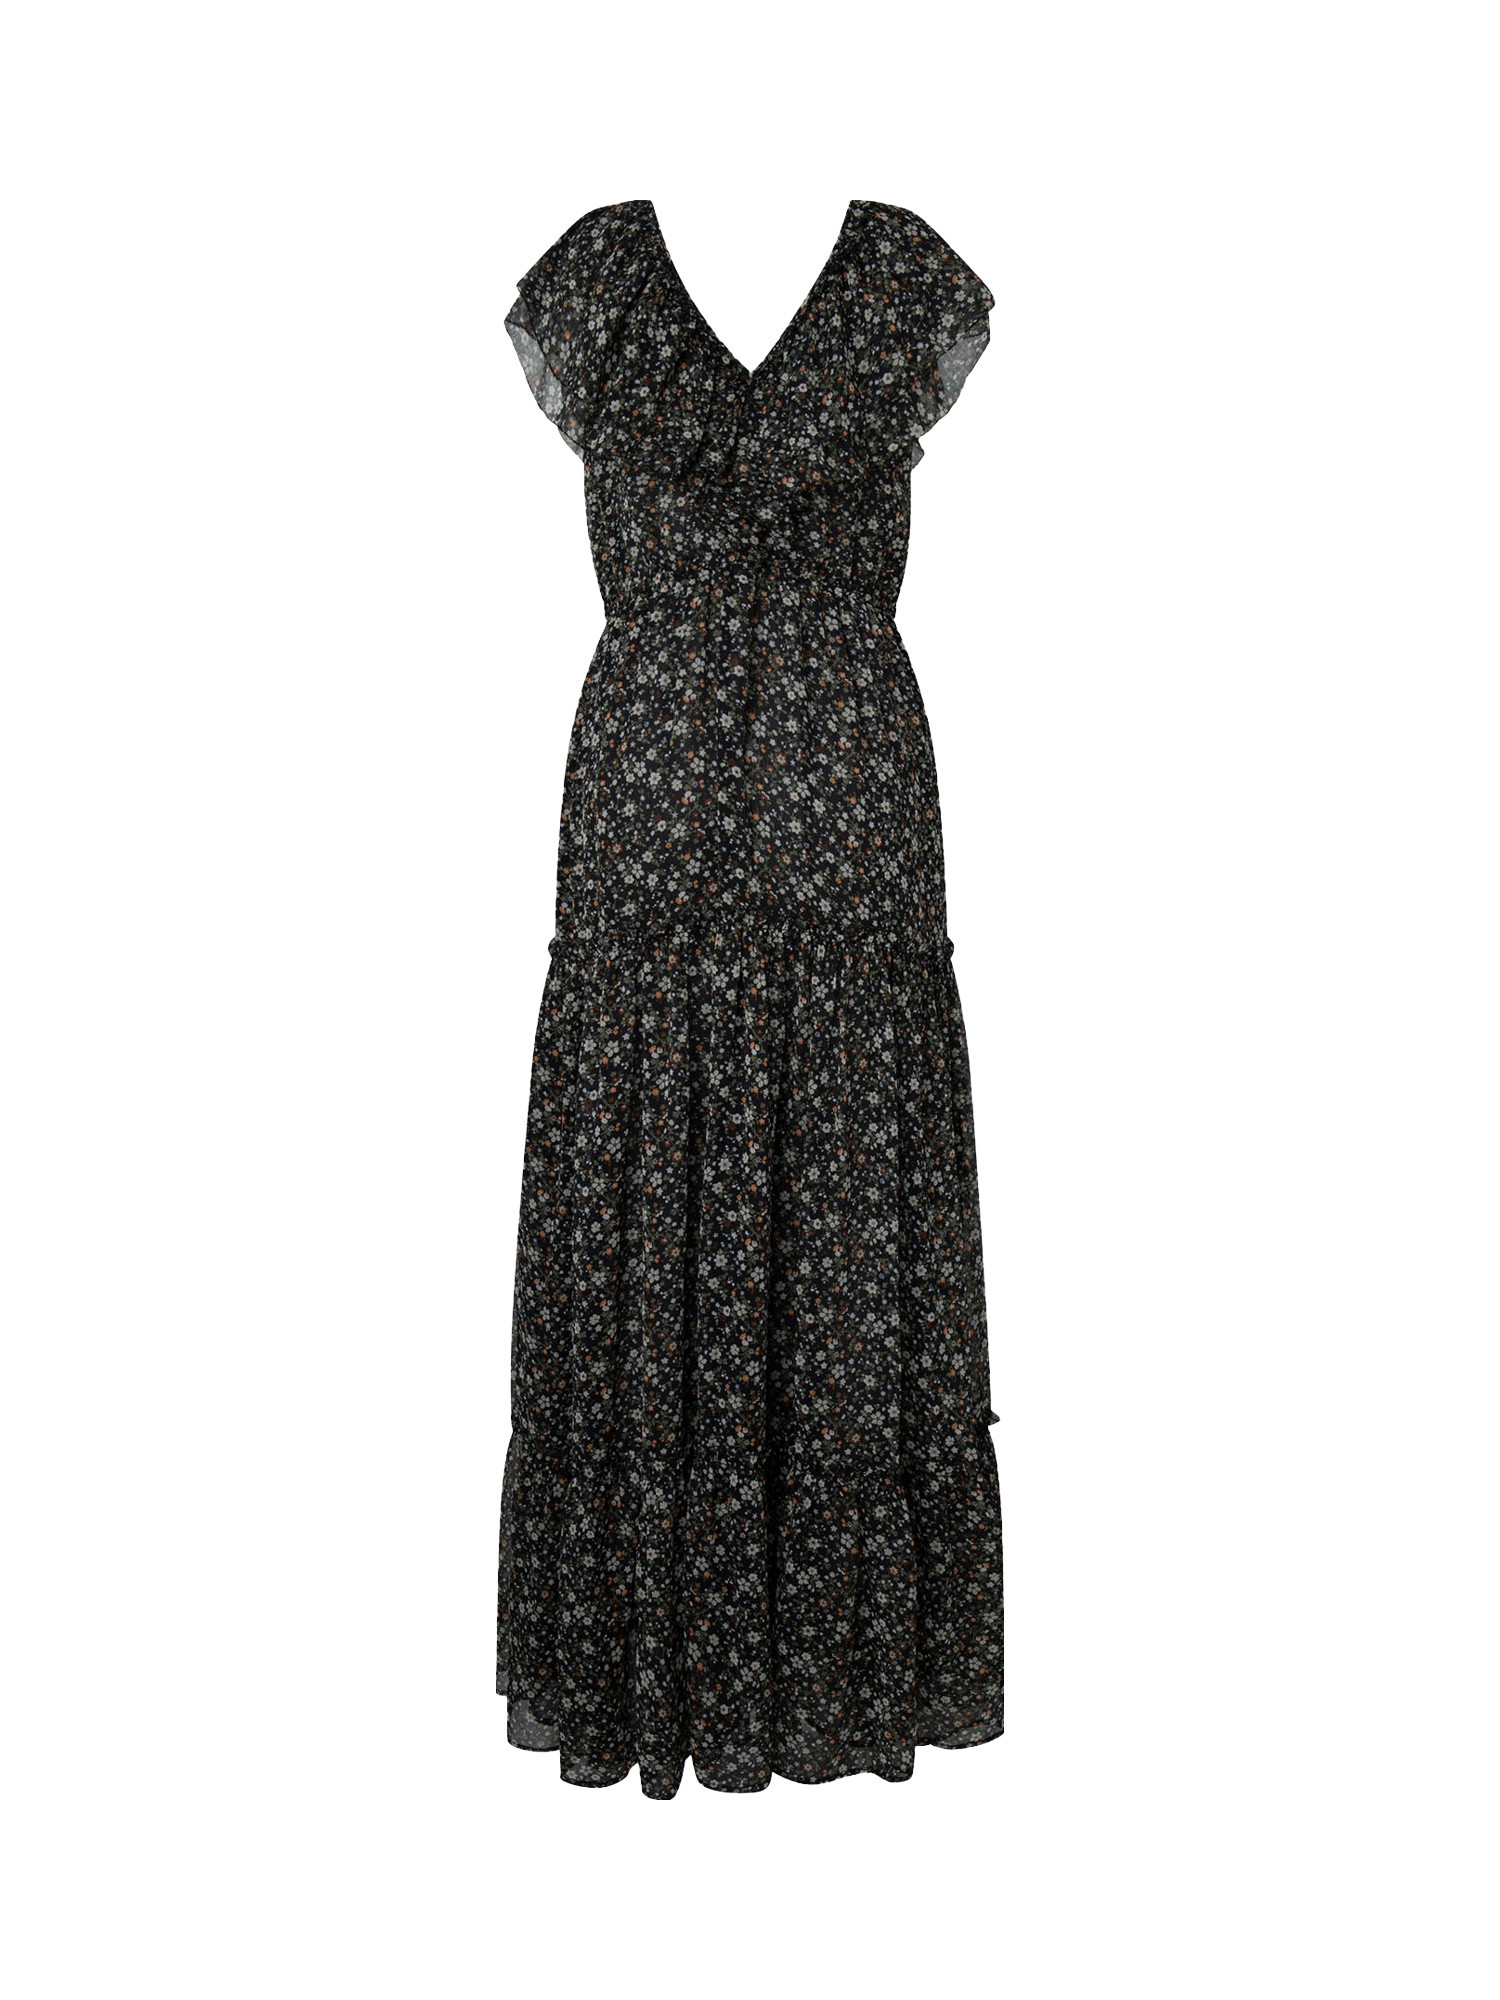 Pepe Jeans - Long dress with floral pattern, Black, large image number 0